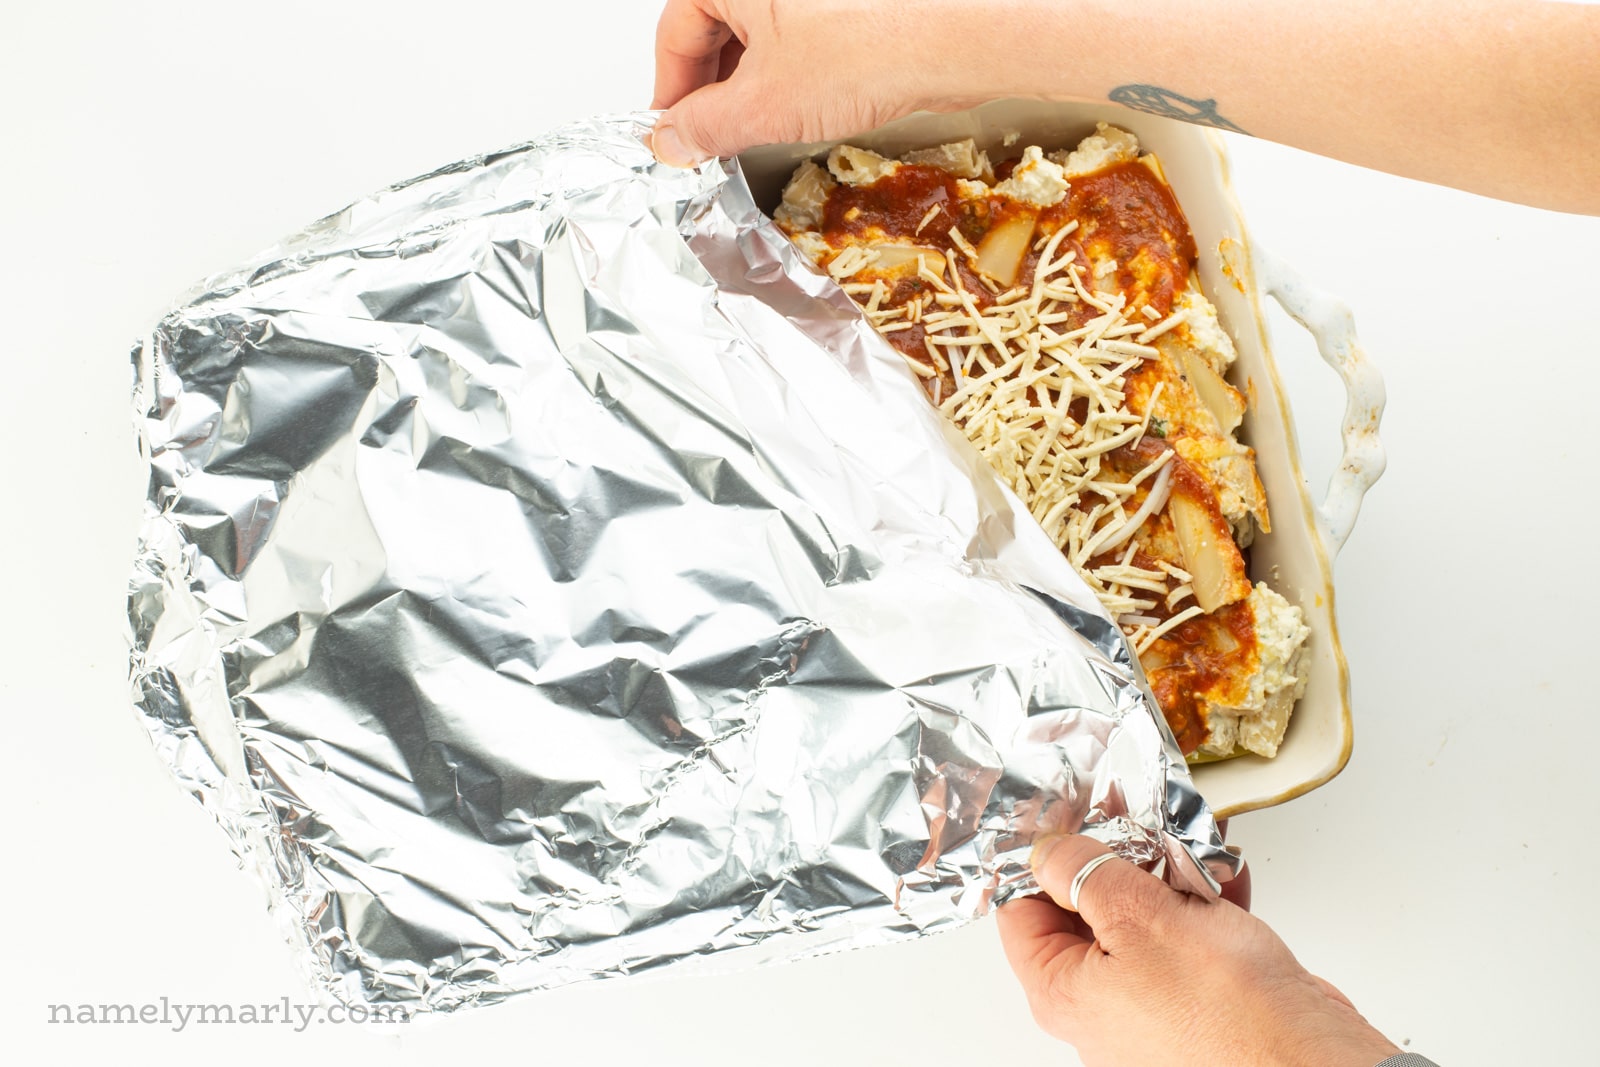 Two hands reach in and cover an unbaked dish of meatless ziti with foil.